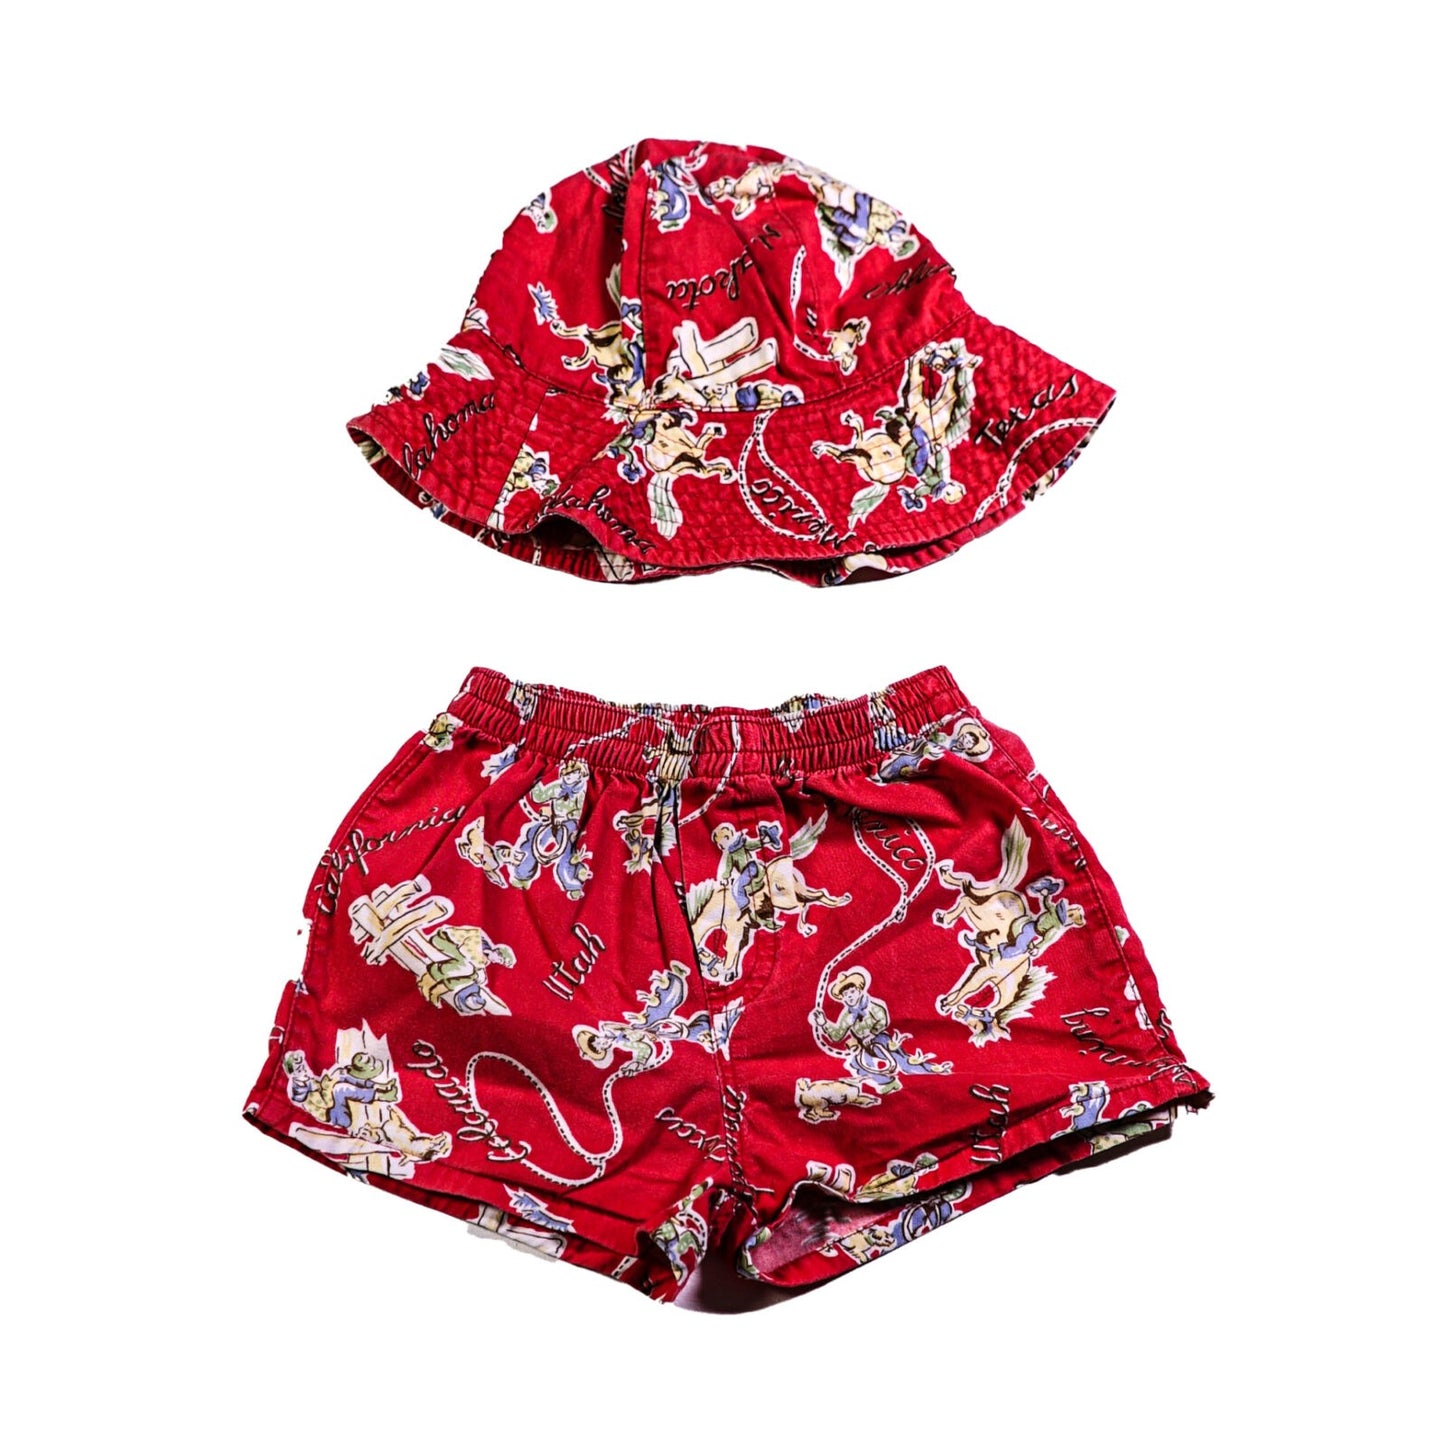 Cotton shorts and hat set with vintage cowboy print